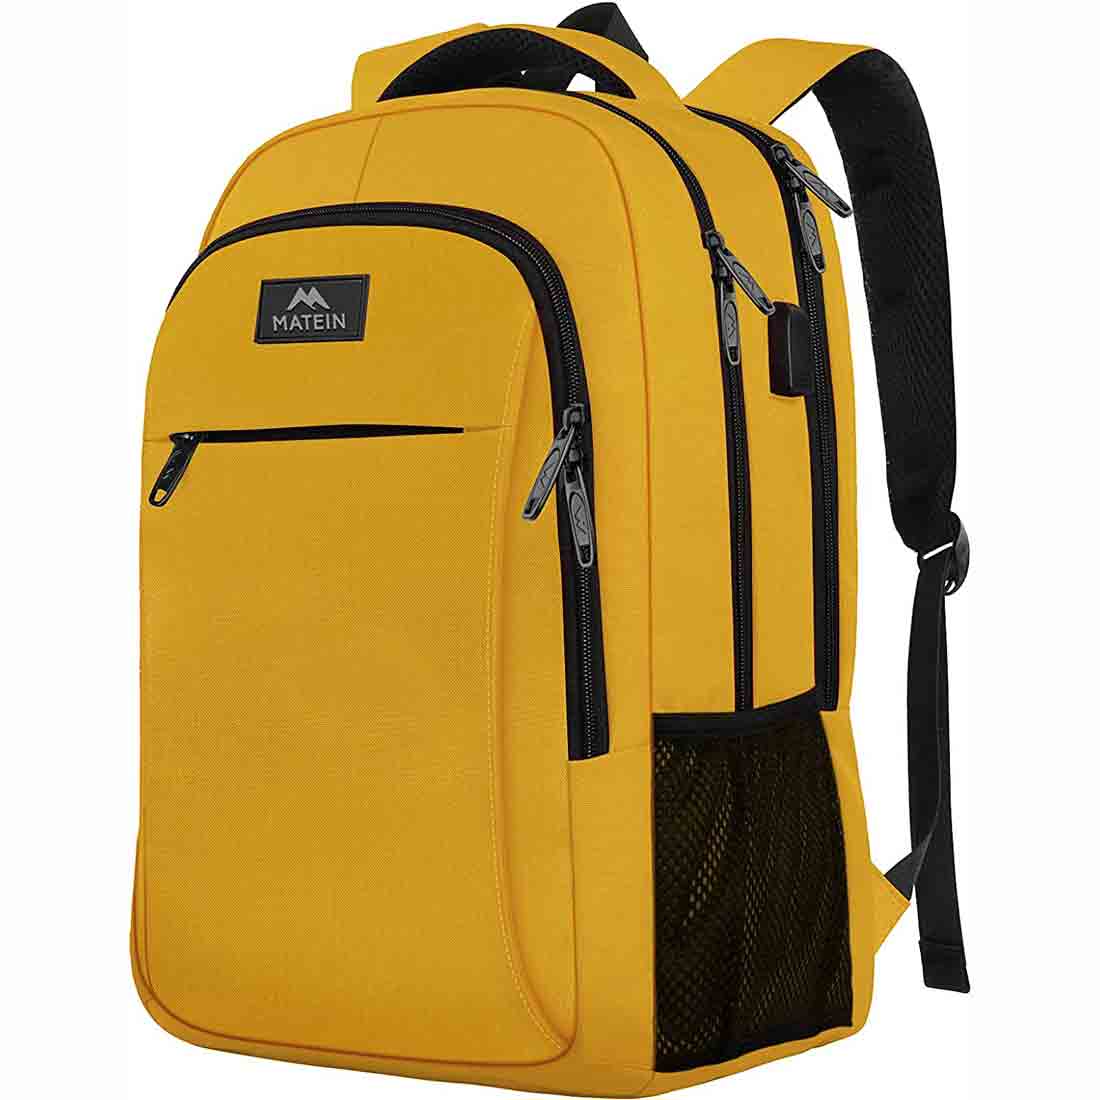 The-Big-Matein-Mlassic-Backpack-travel-laptop-backpack-in-yellow